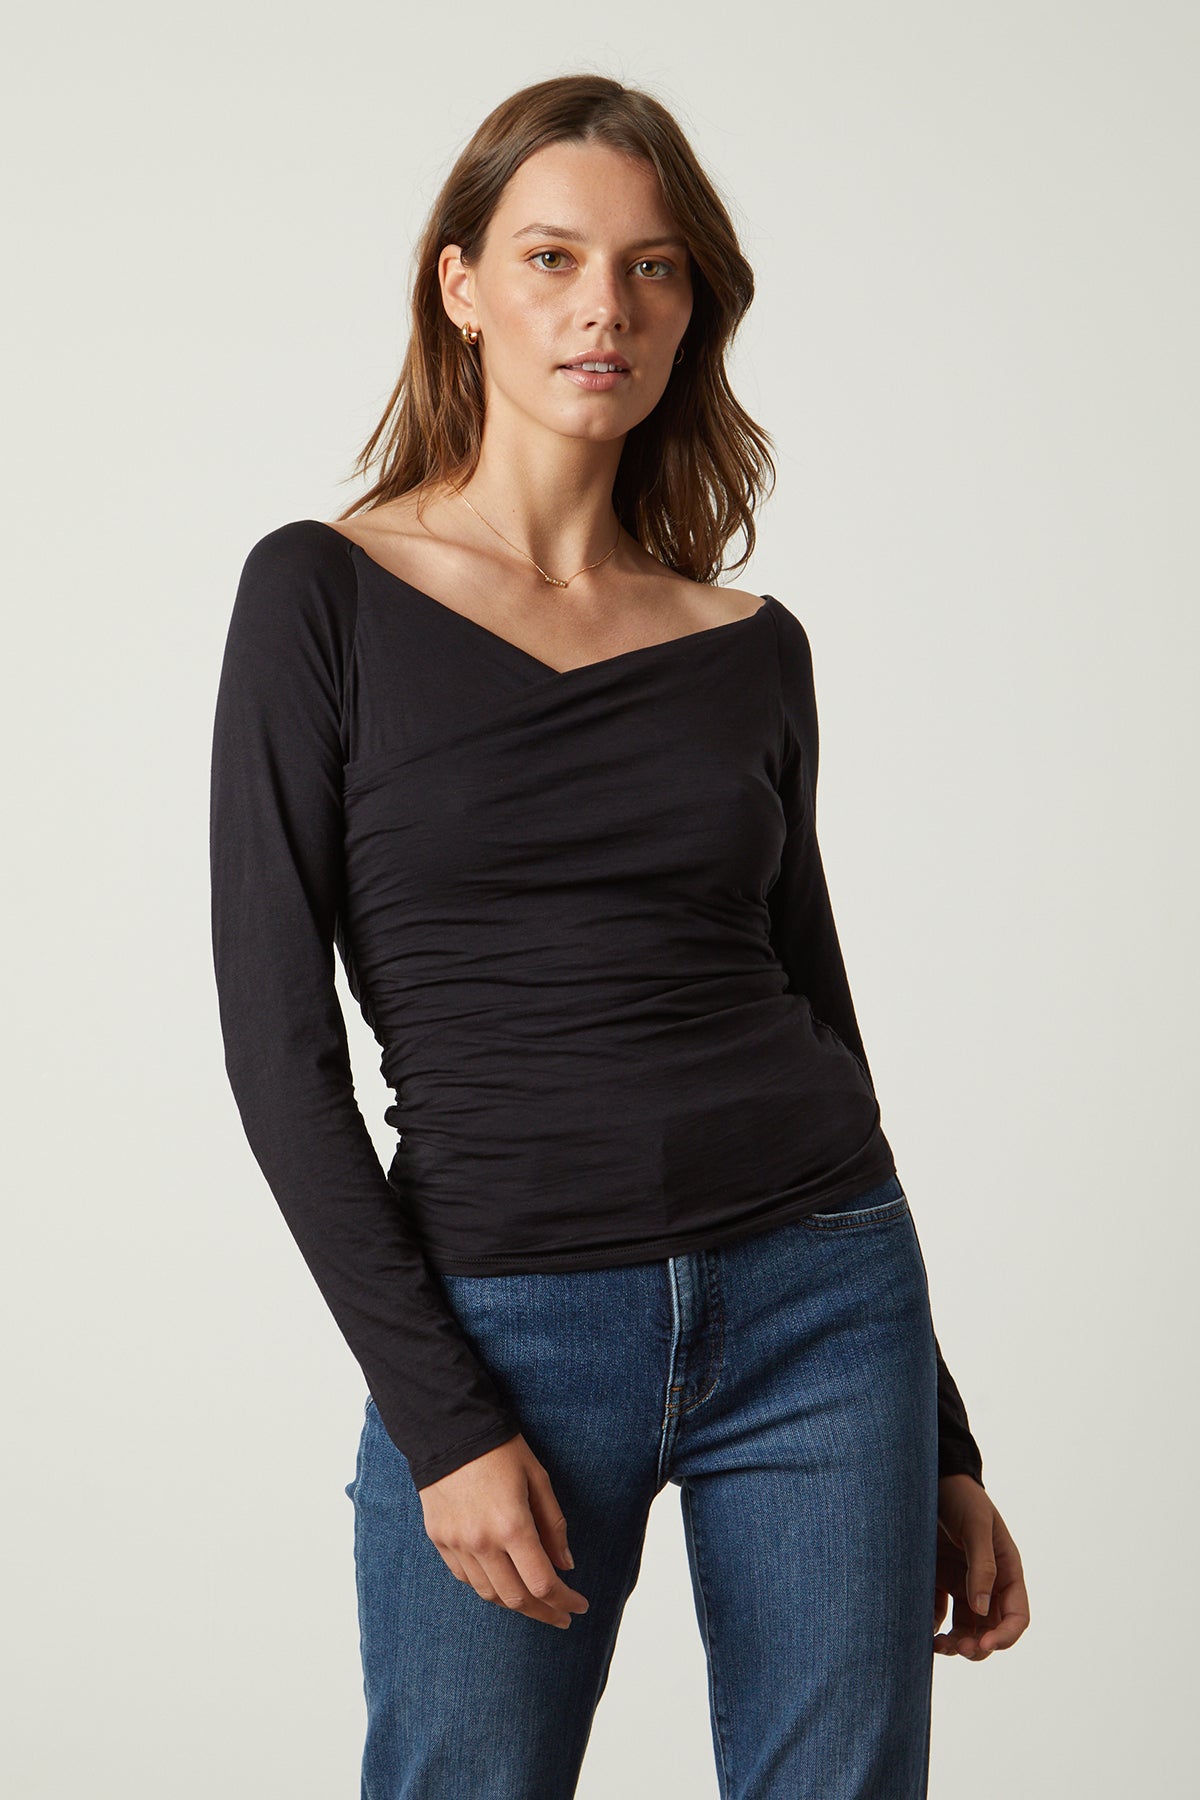 Tabbie Shirred Fitted Tee in black with blue denim front-25548611911873